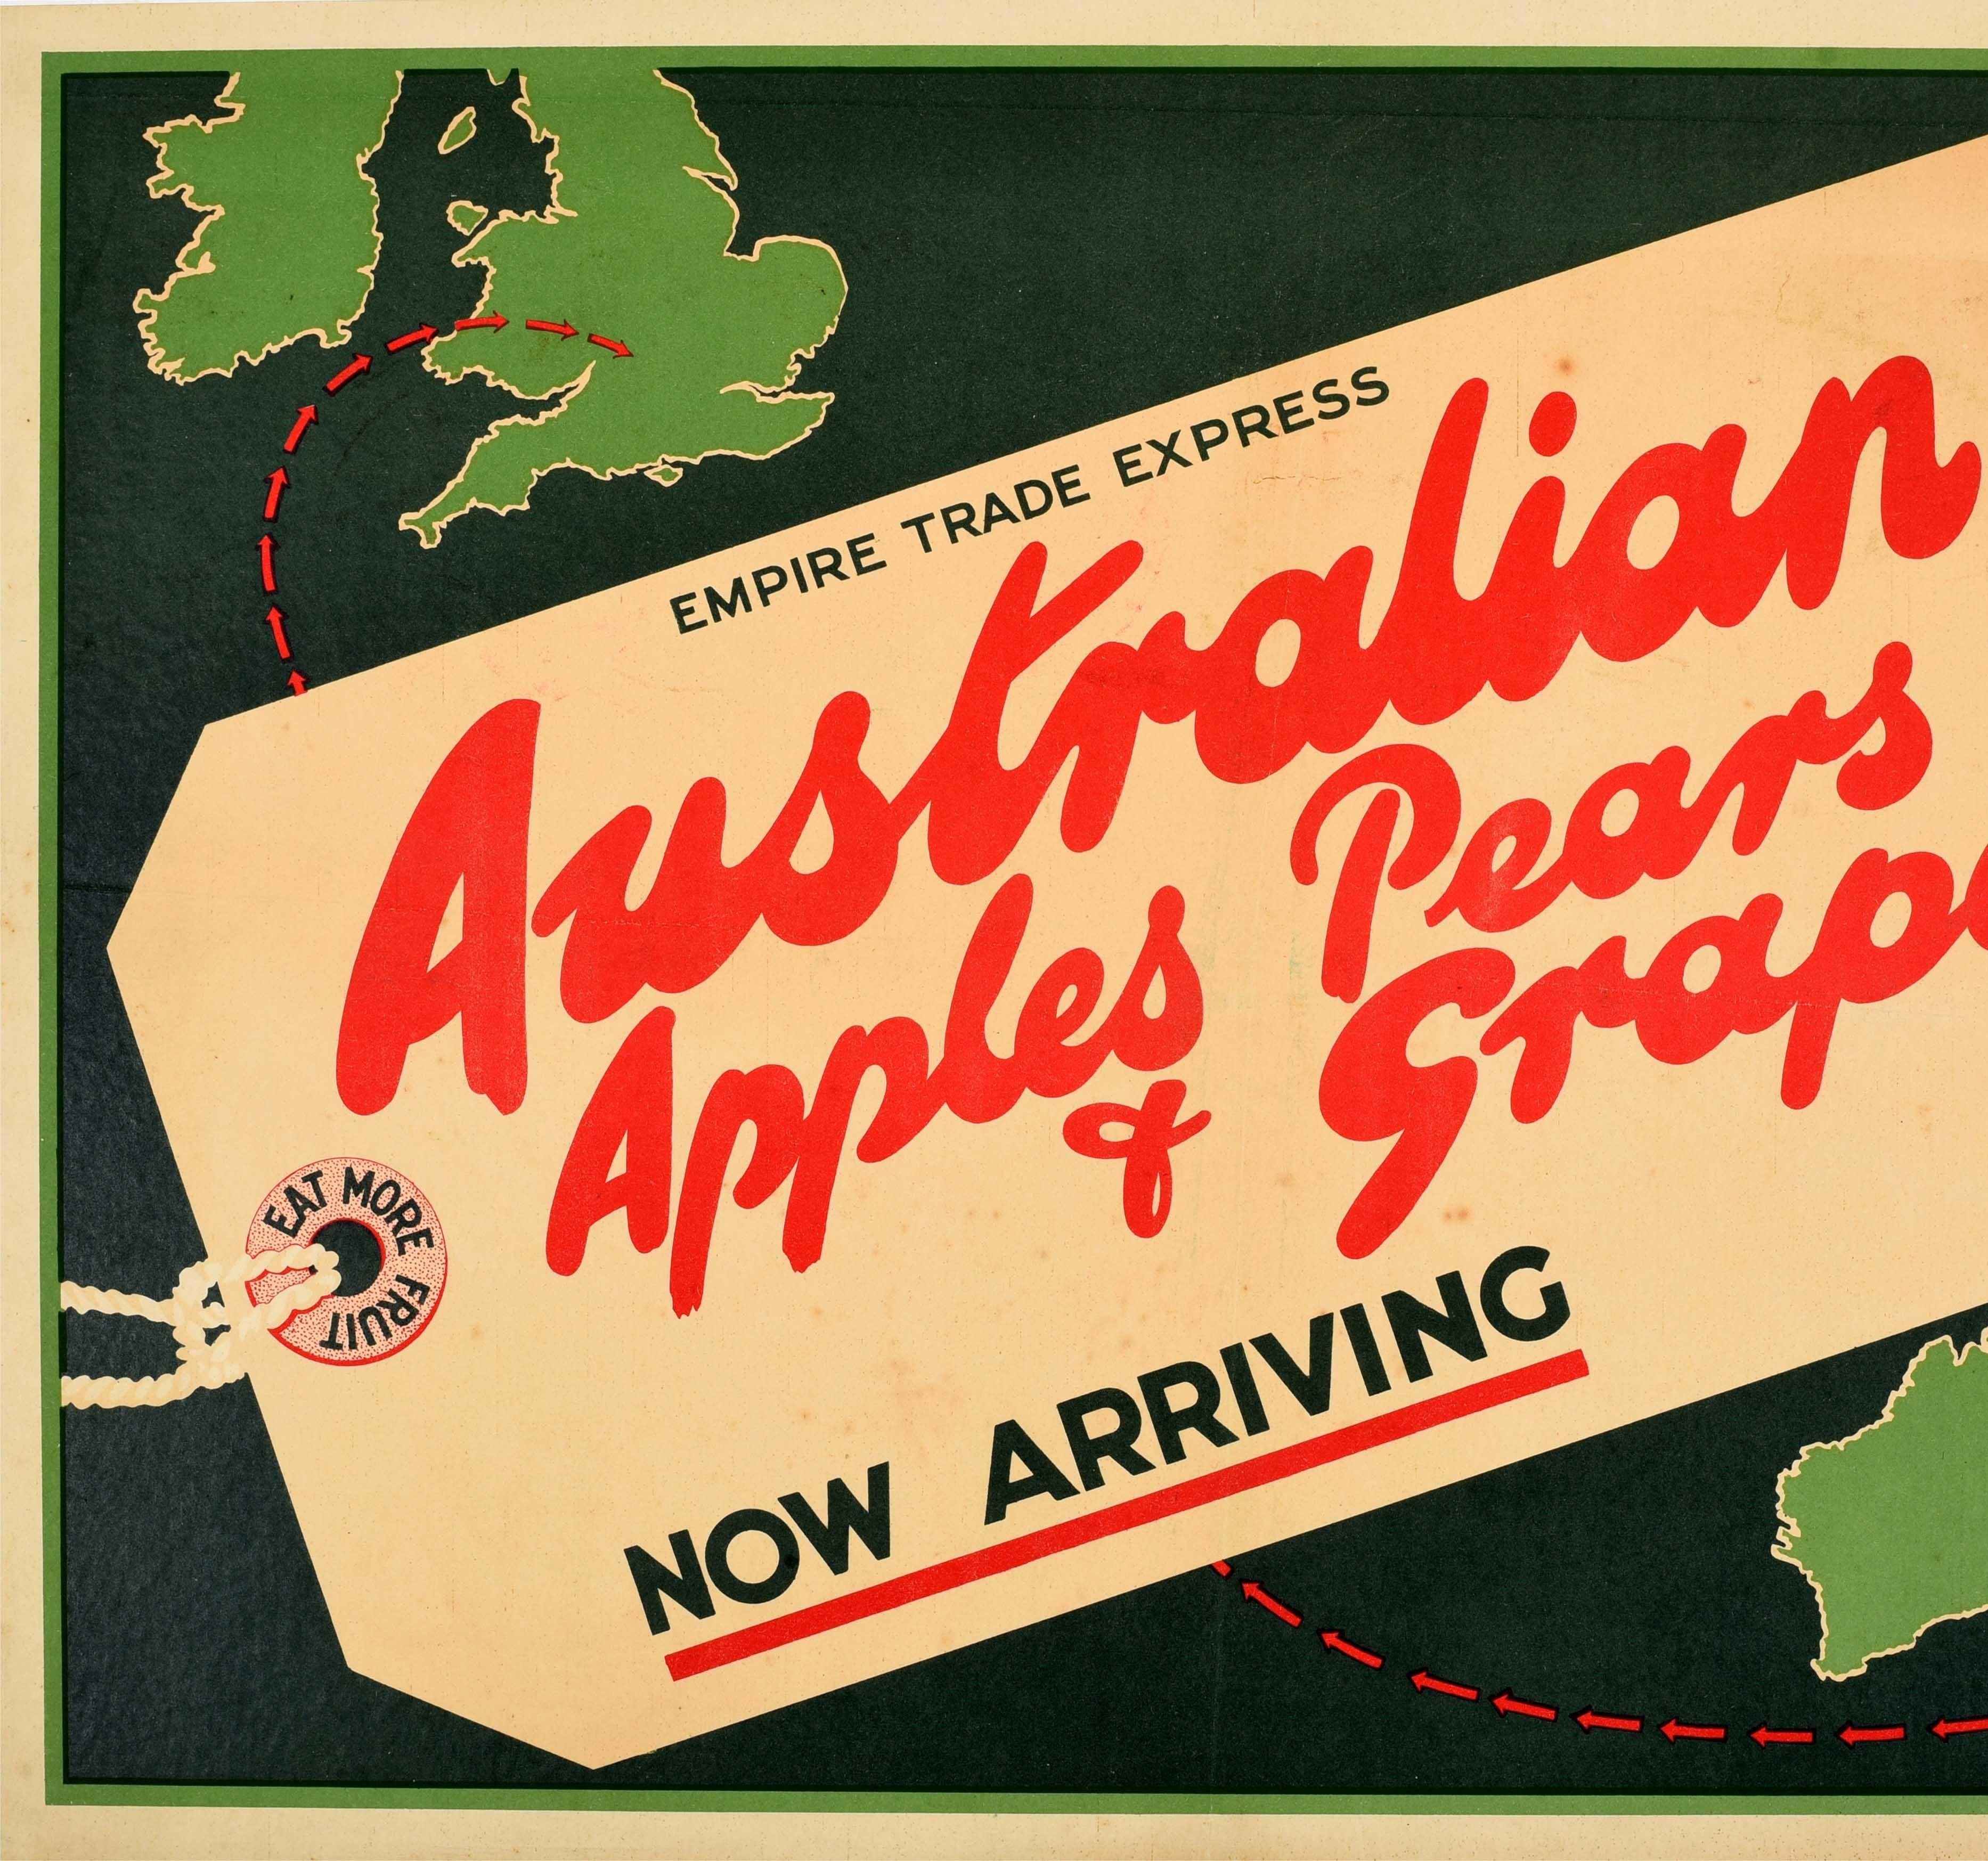 Original vintage food advertising poster - Australian Apples Pears and Grapes Now arriving - featuring a great design depicting an Empire Trade Express luggage label marked Eat More Fruit around the string hole, in front of a map background with a